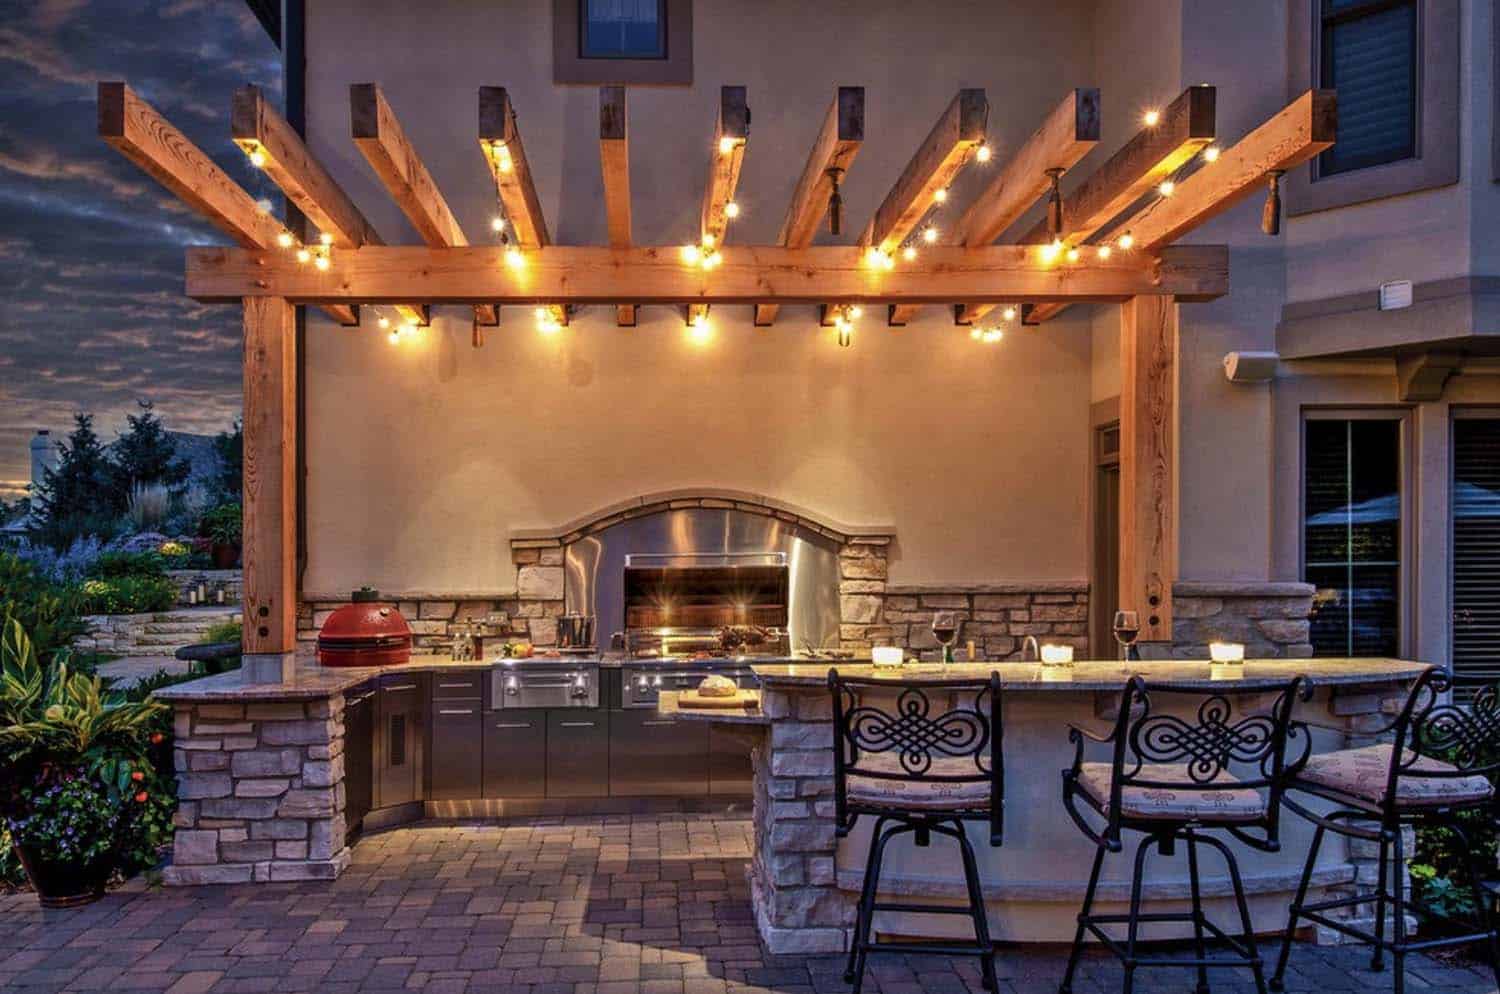 18+ Spectacular outdoor kitchens with bars for entertaining